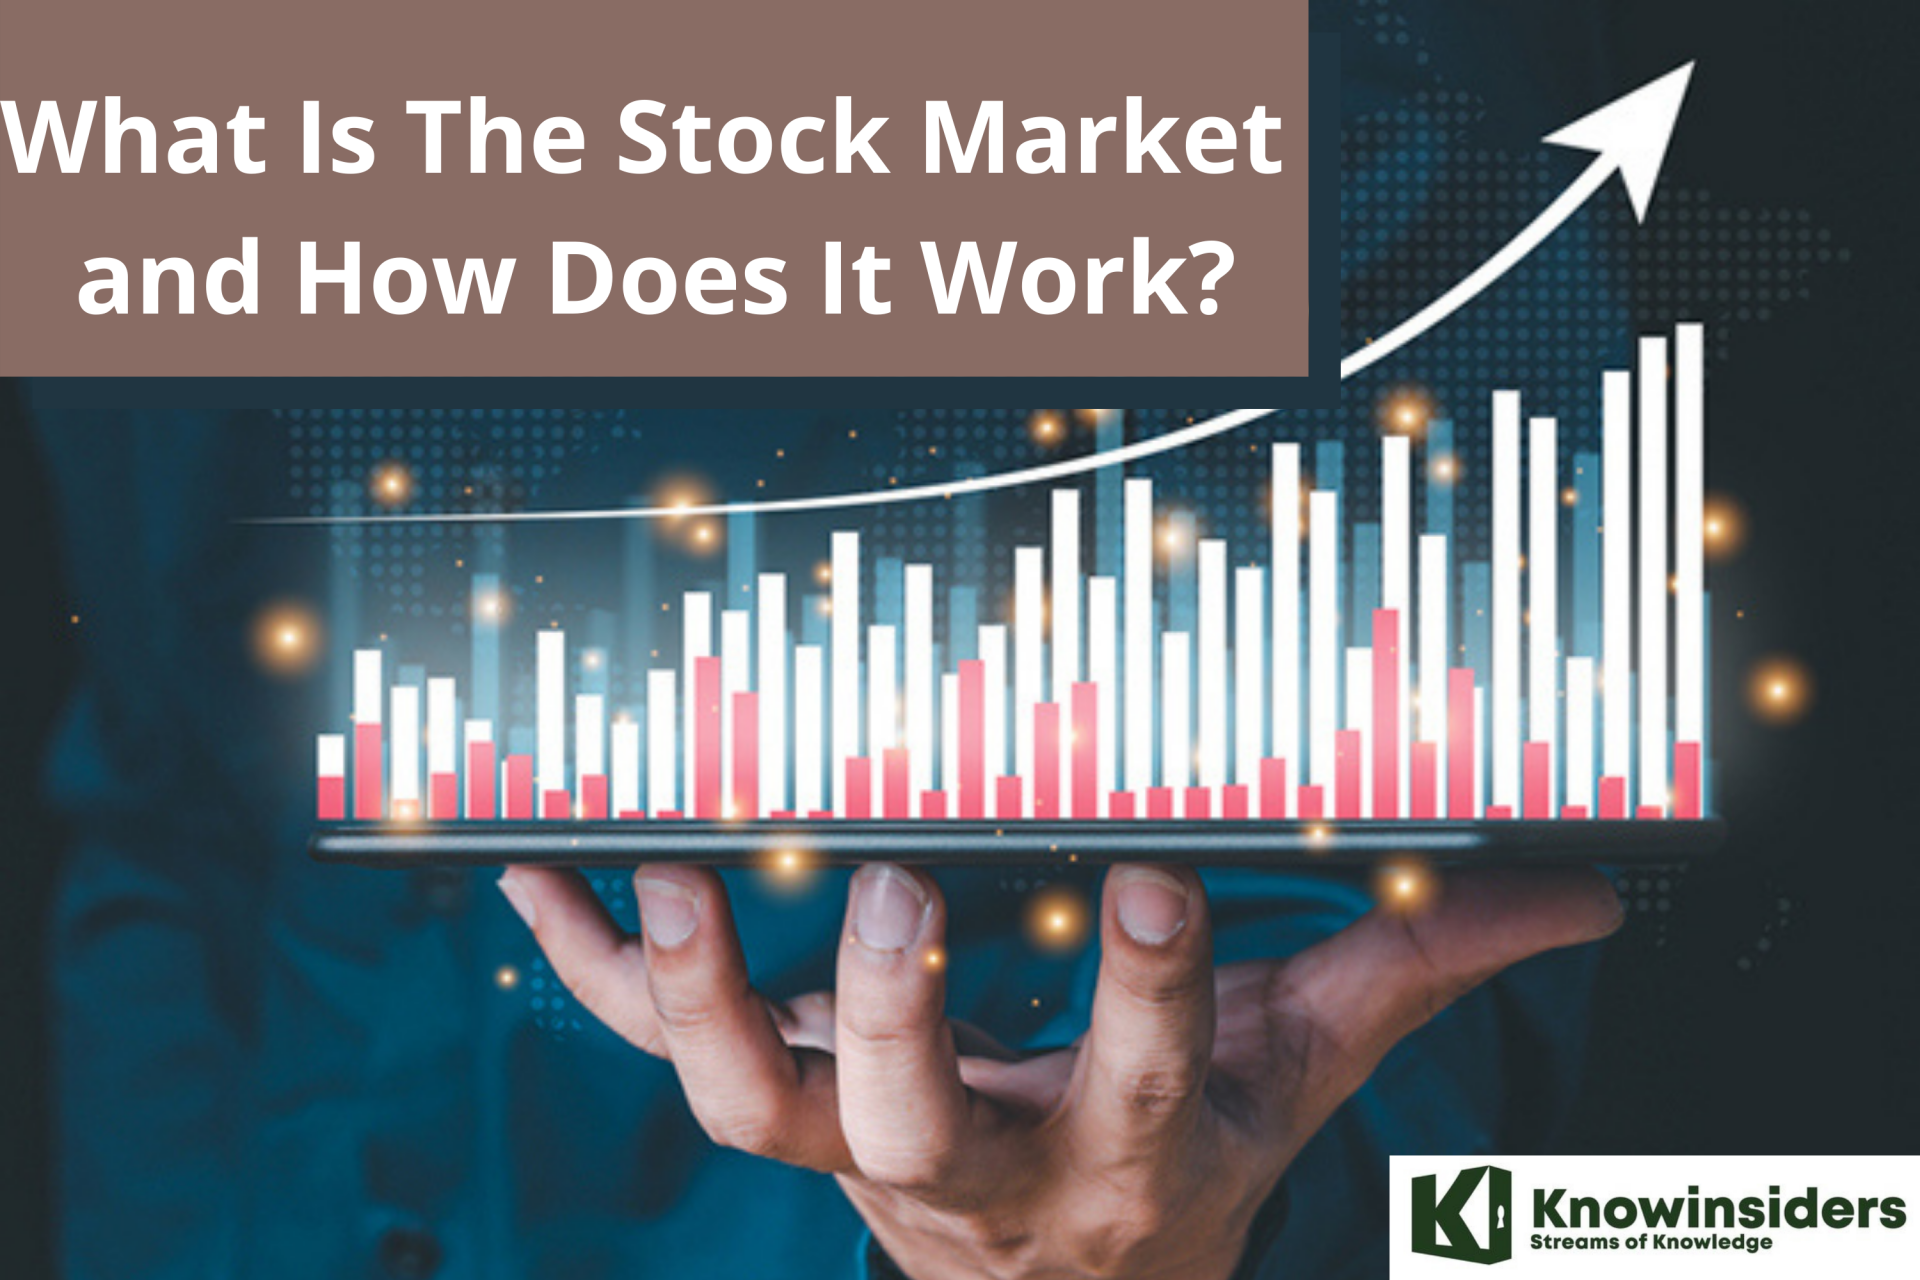 What Is The Stock Market and How Does It Work?